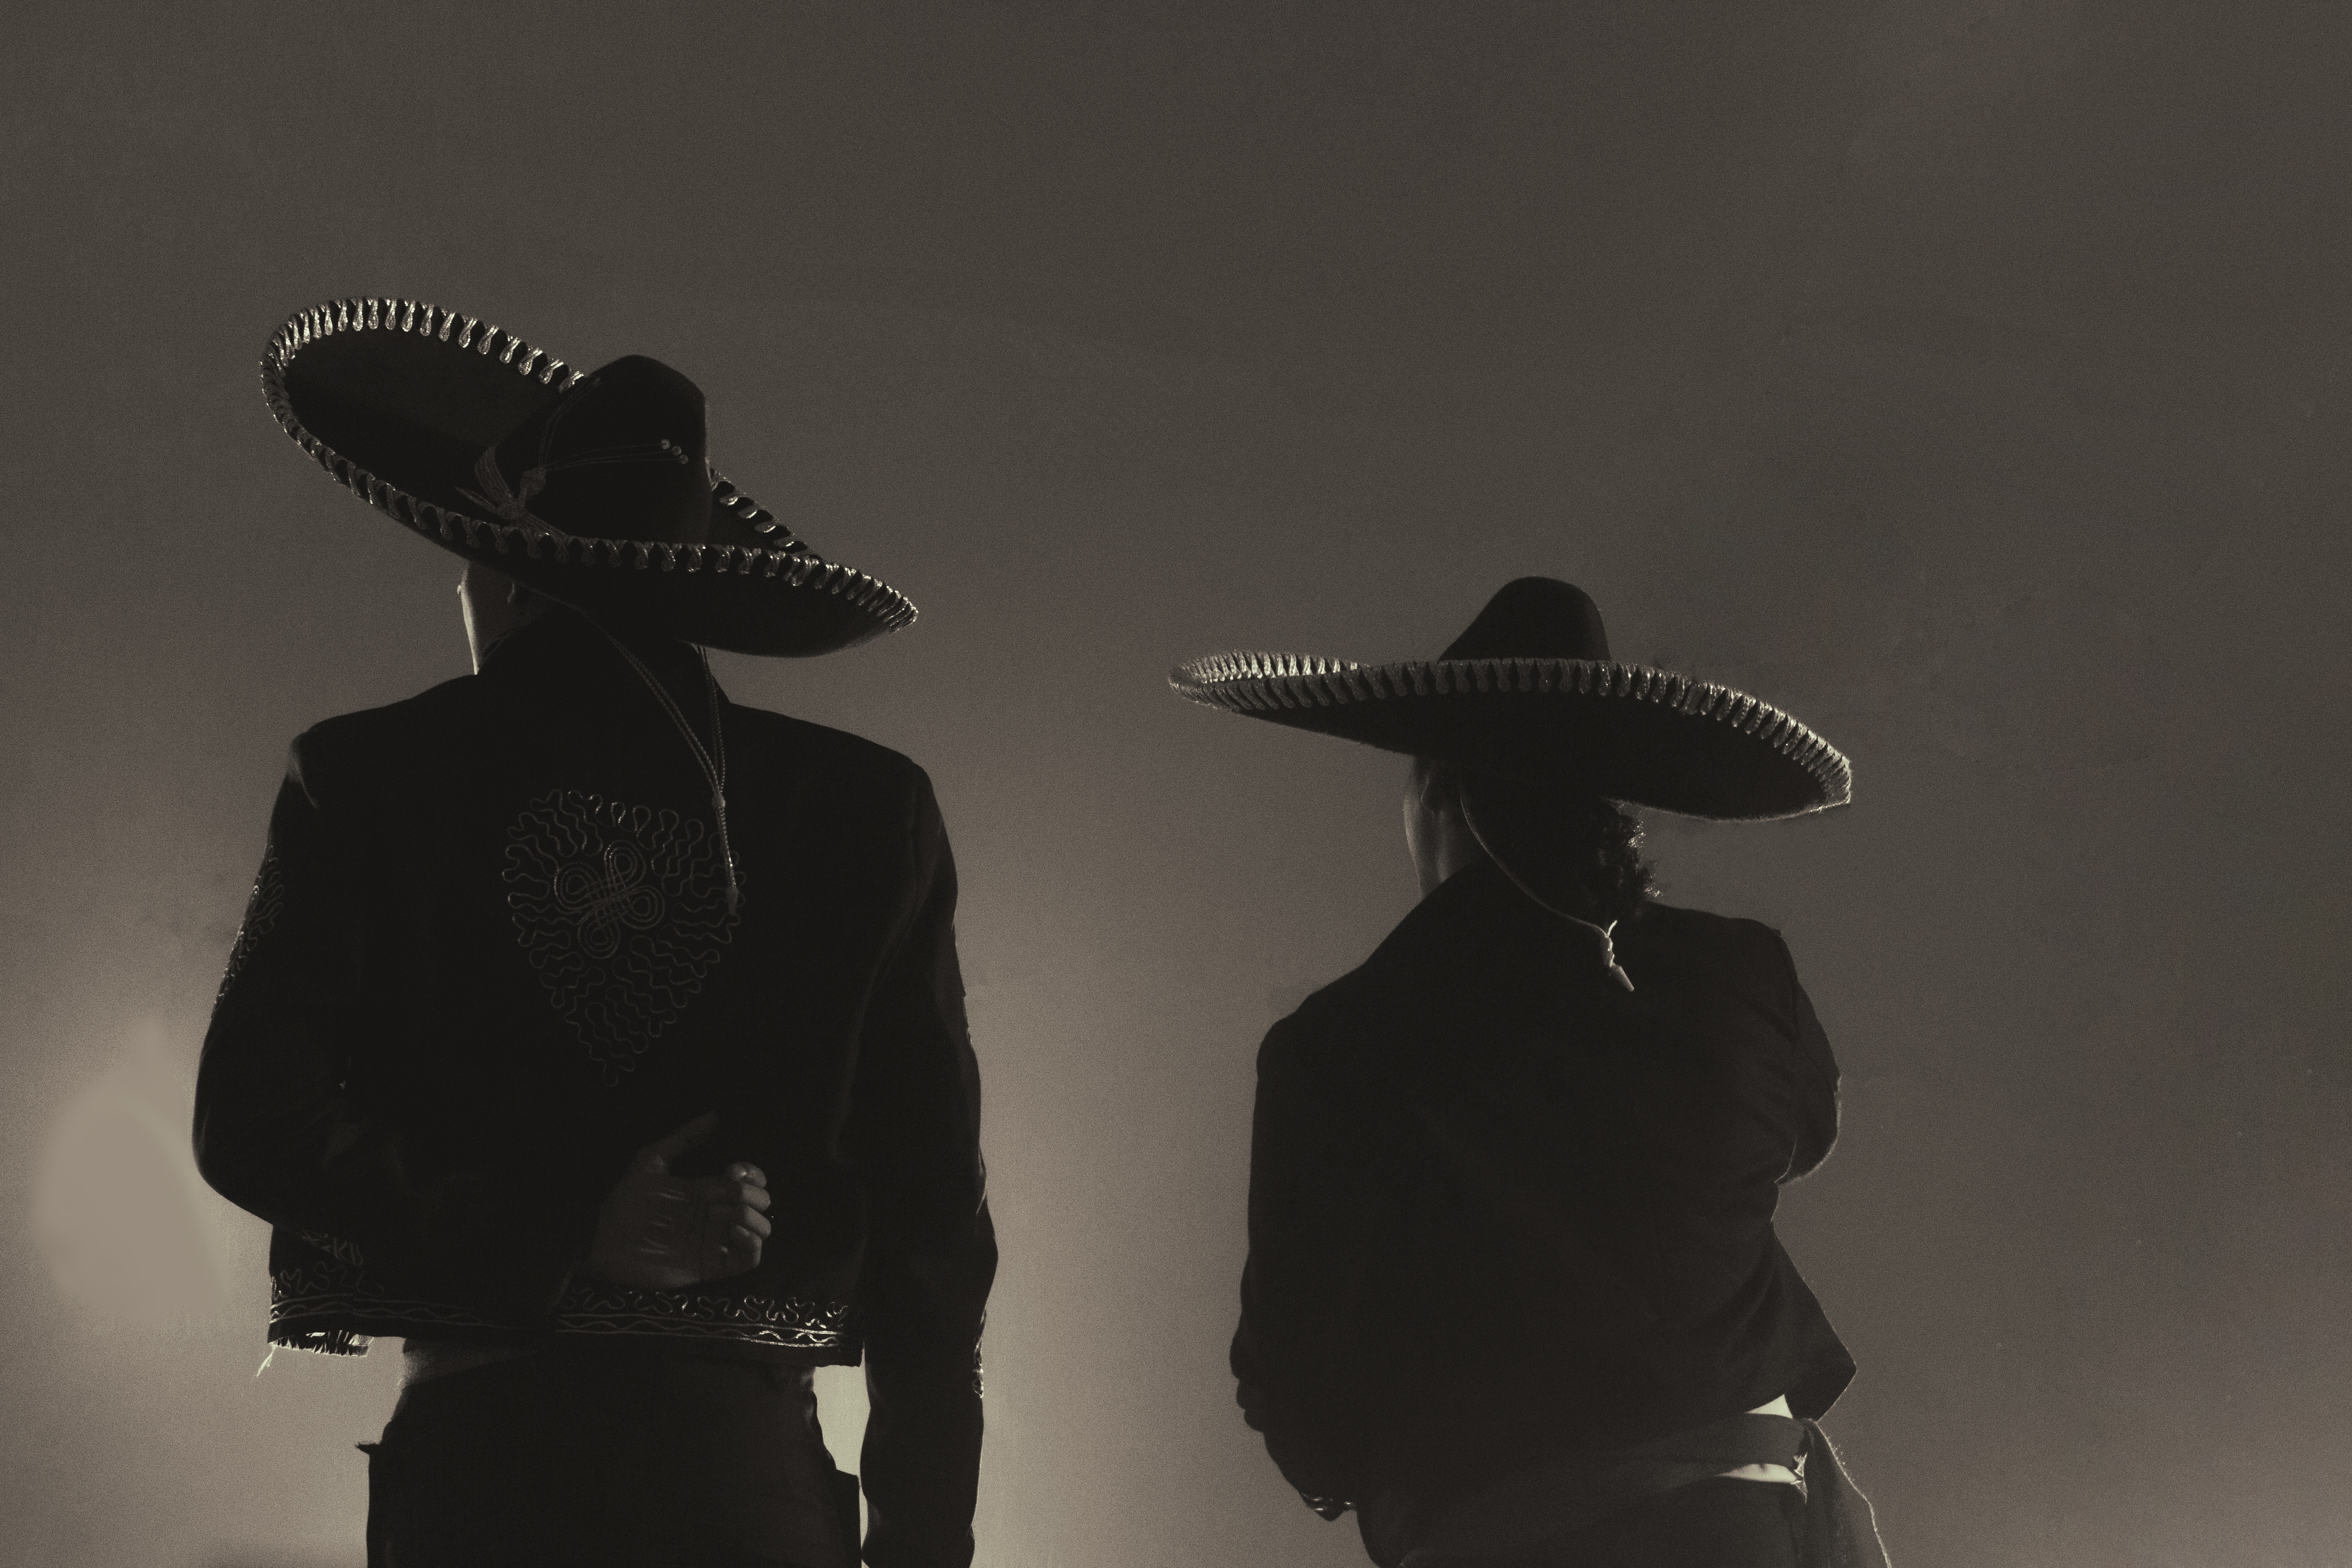 Black and white photo of an old fashioned mariachi band